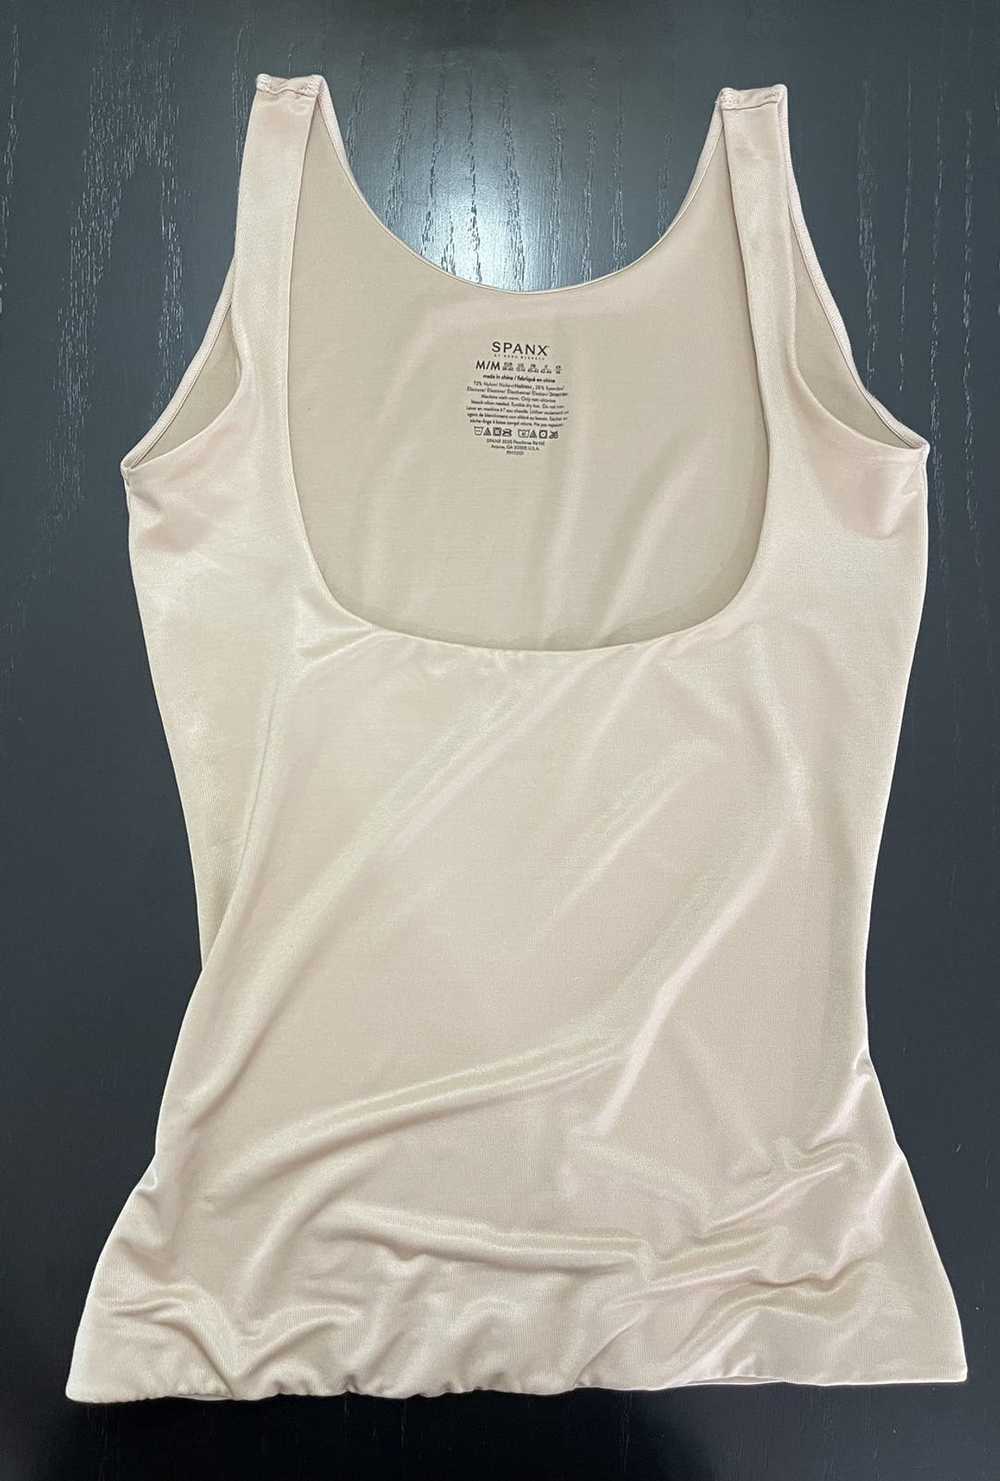 Spanx Spanx Open Front Cami - image 6